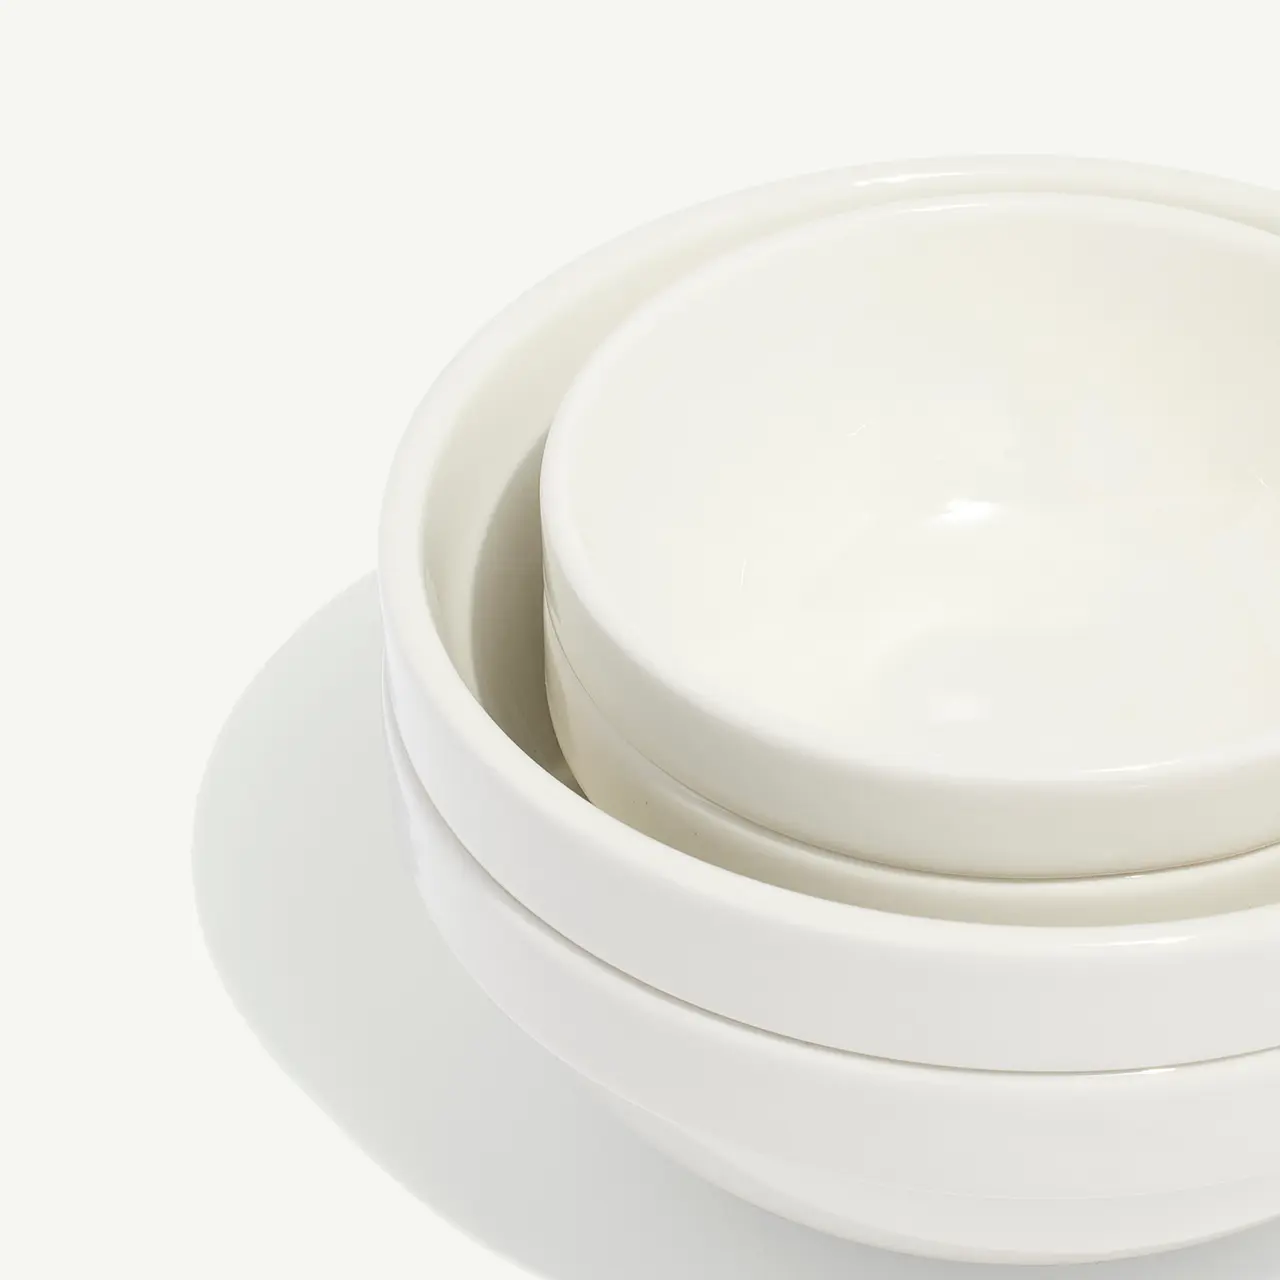 Stacked white ceramic dishes on a plain background display a simple and clean design.